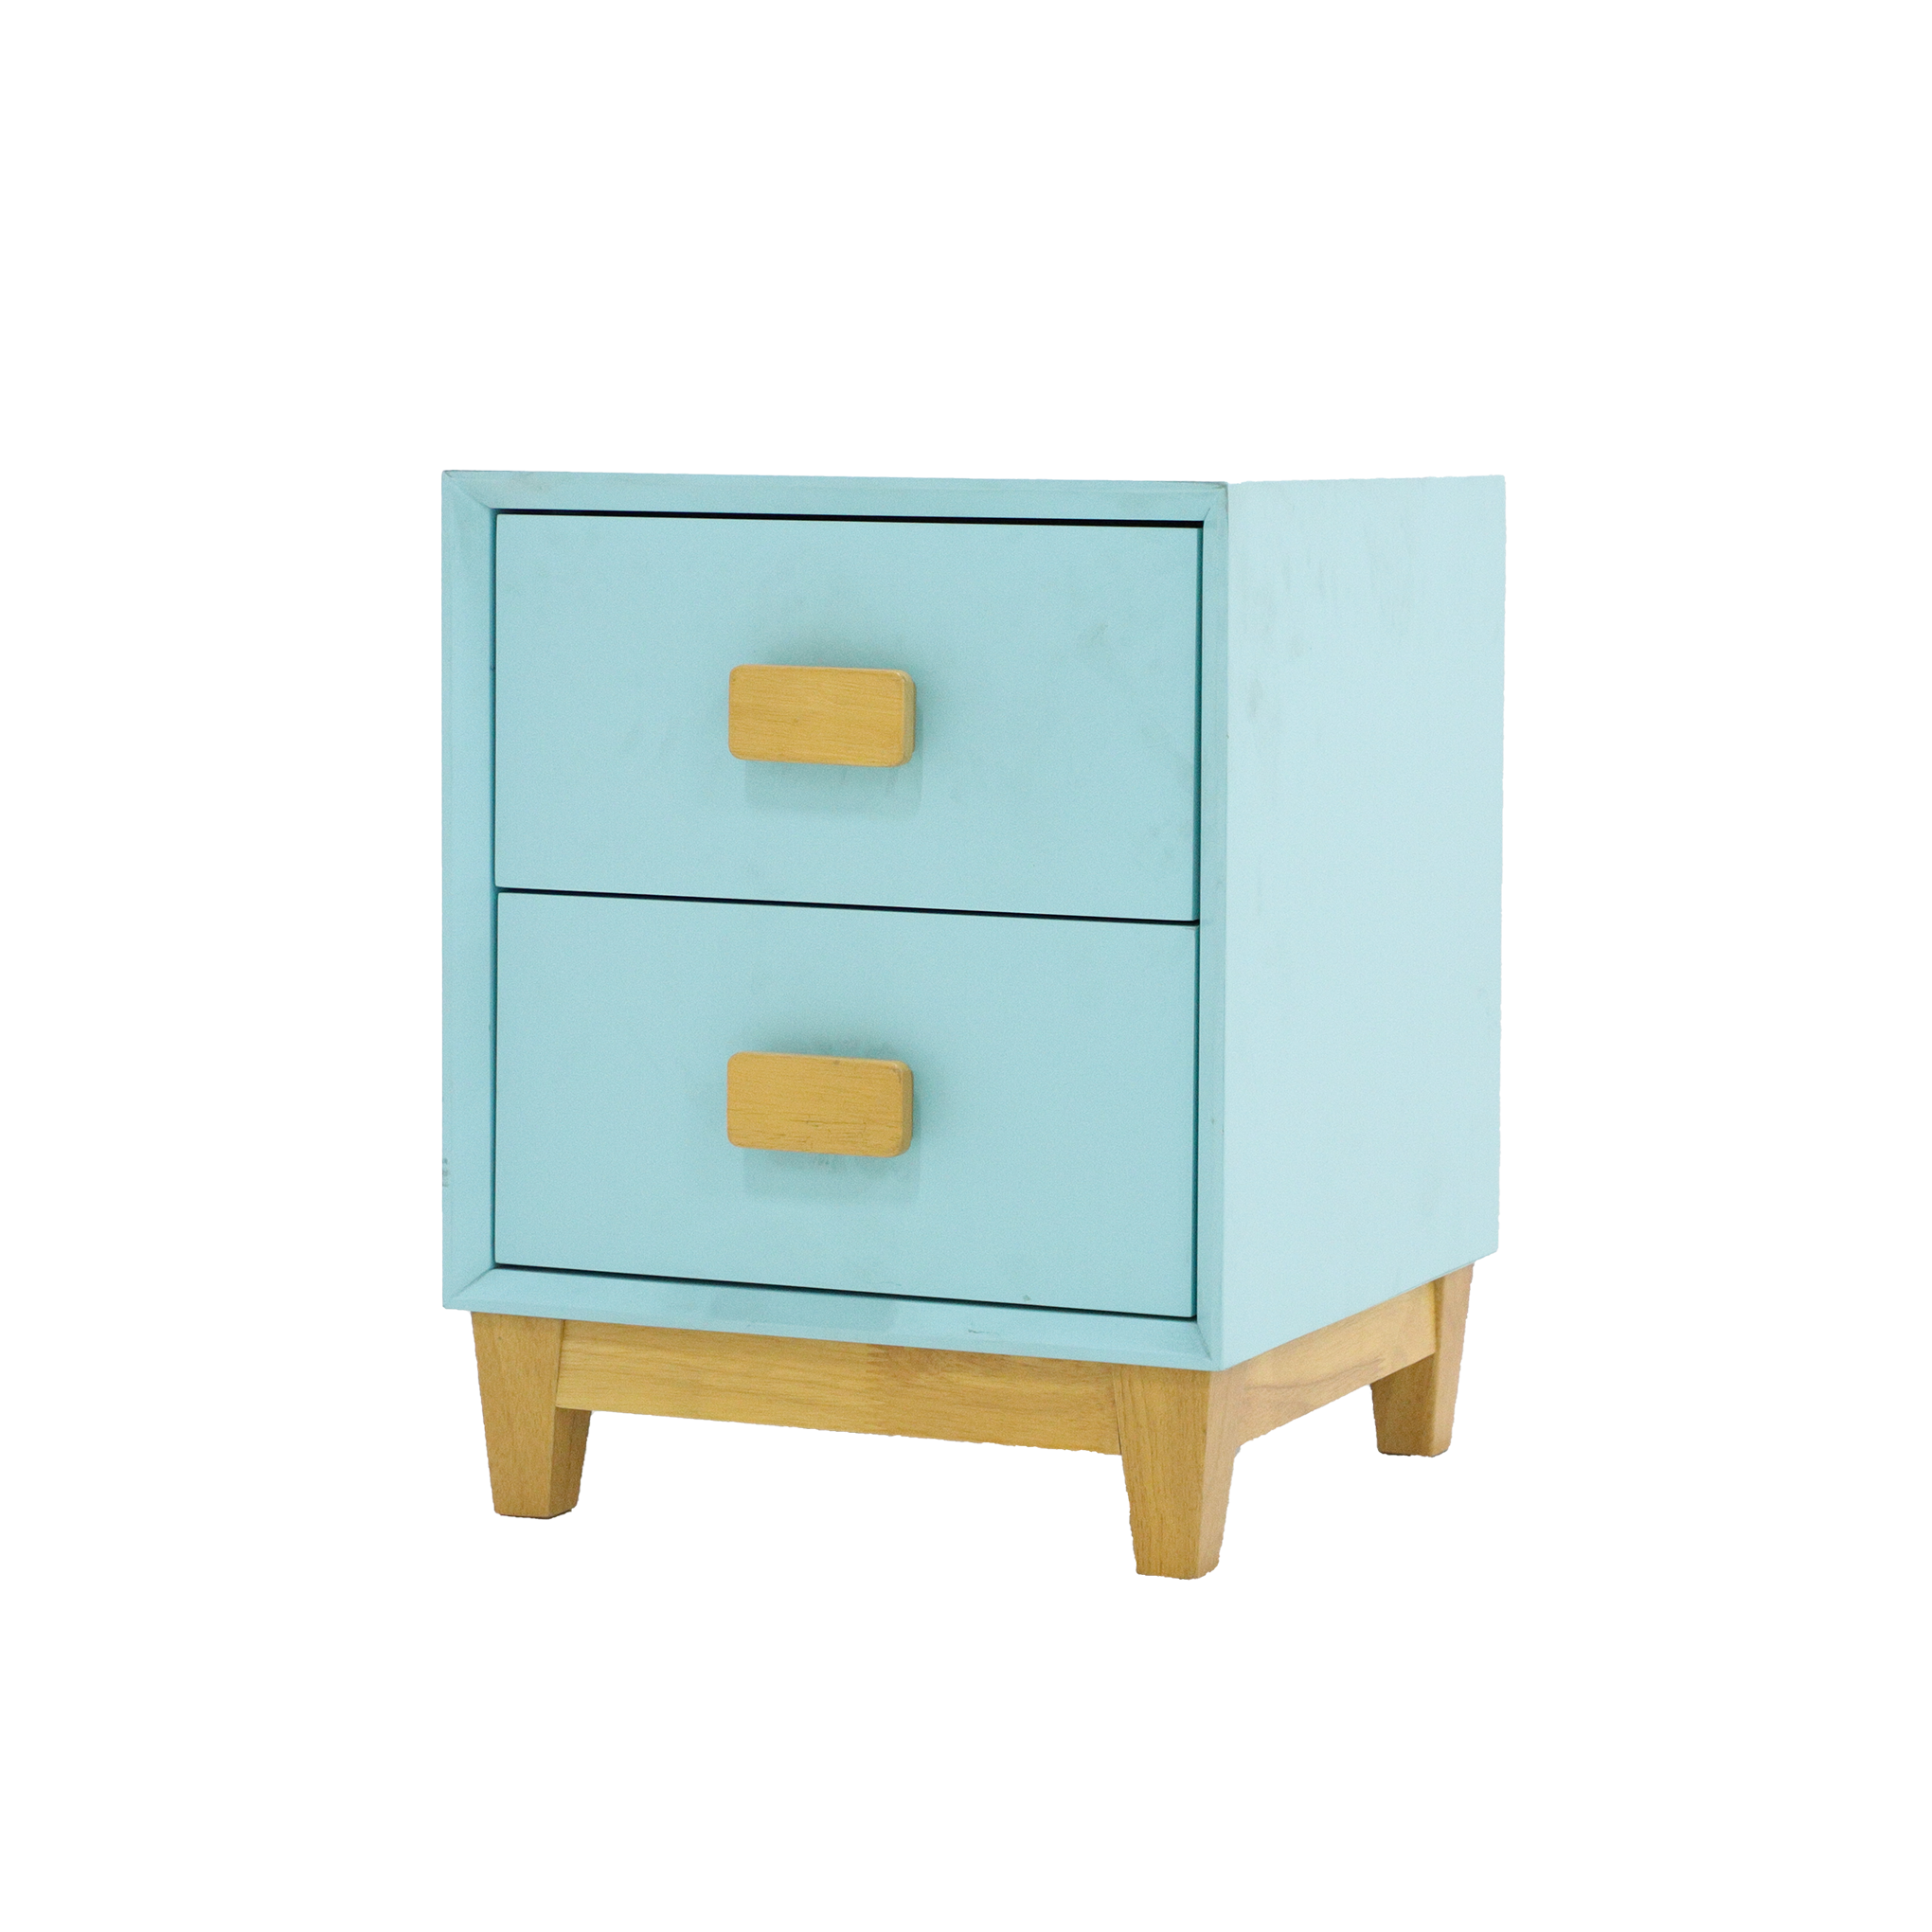 <b>Tiffany Bedside Table with 2 Drawer</b><br>L400 X D400 X H505MM